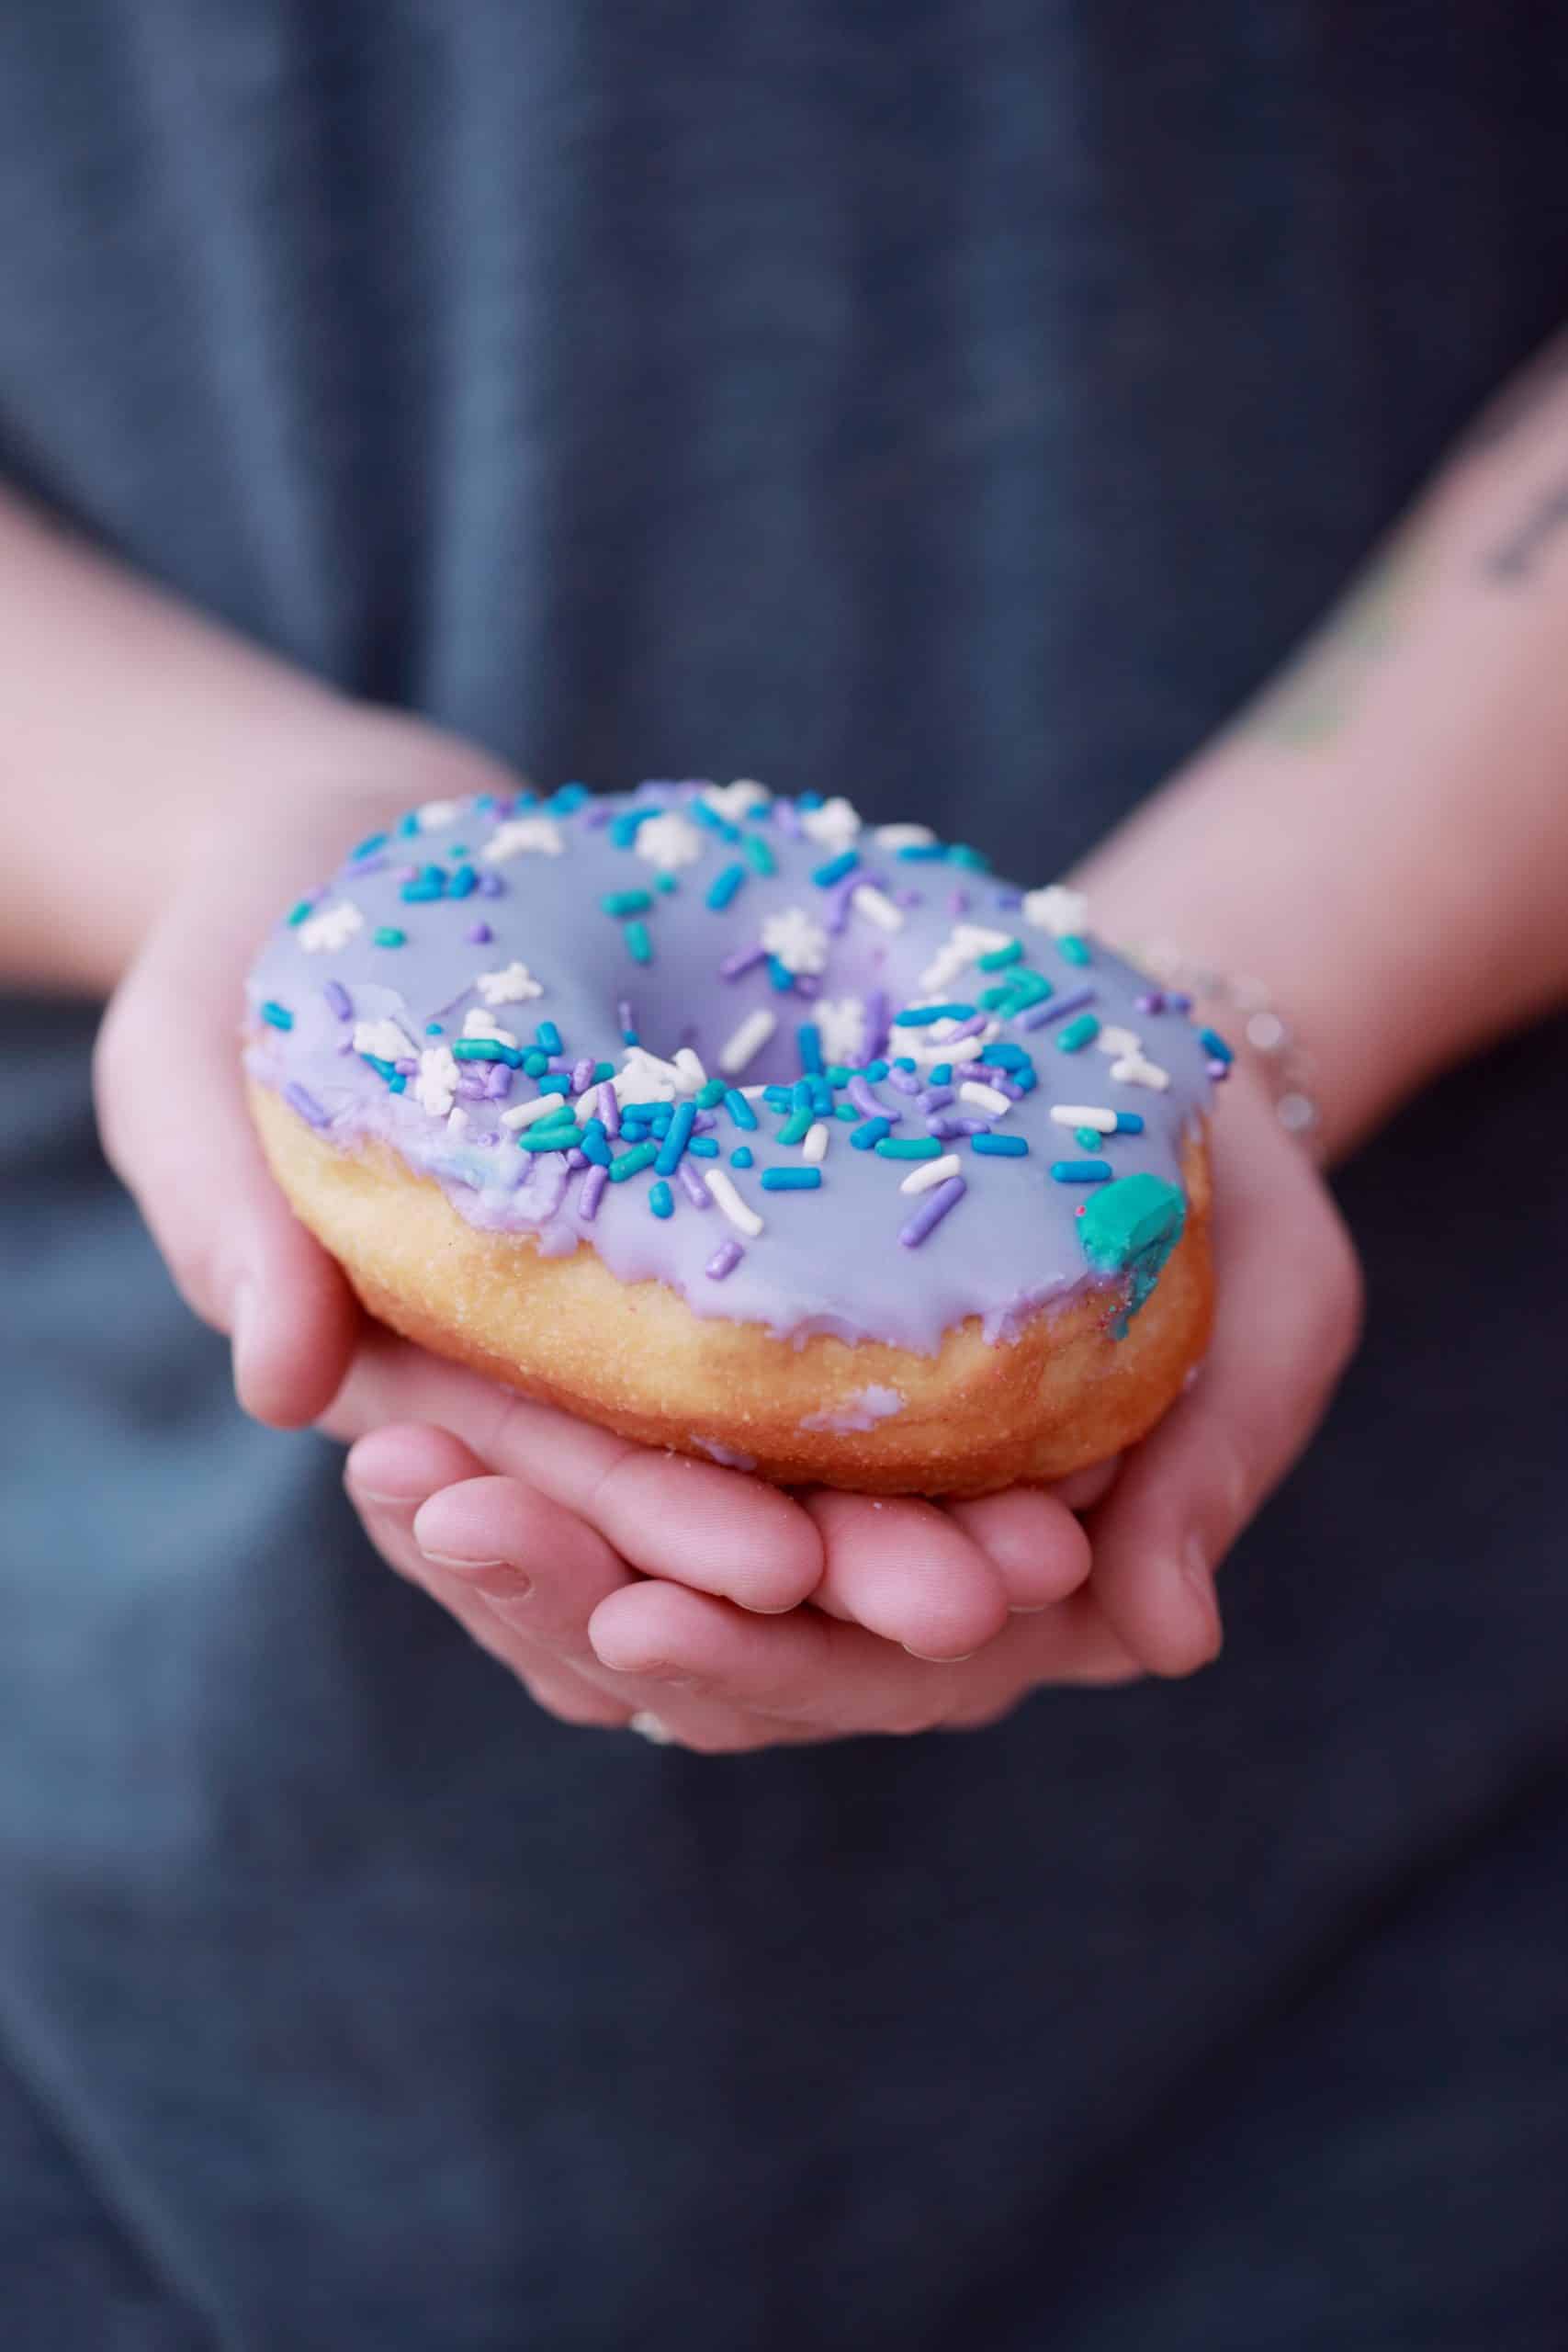 Want someone's personal data? Give them a free donut